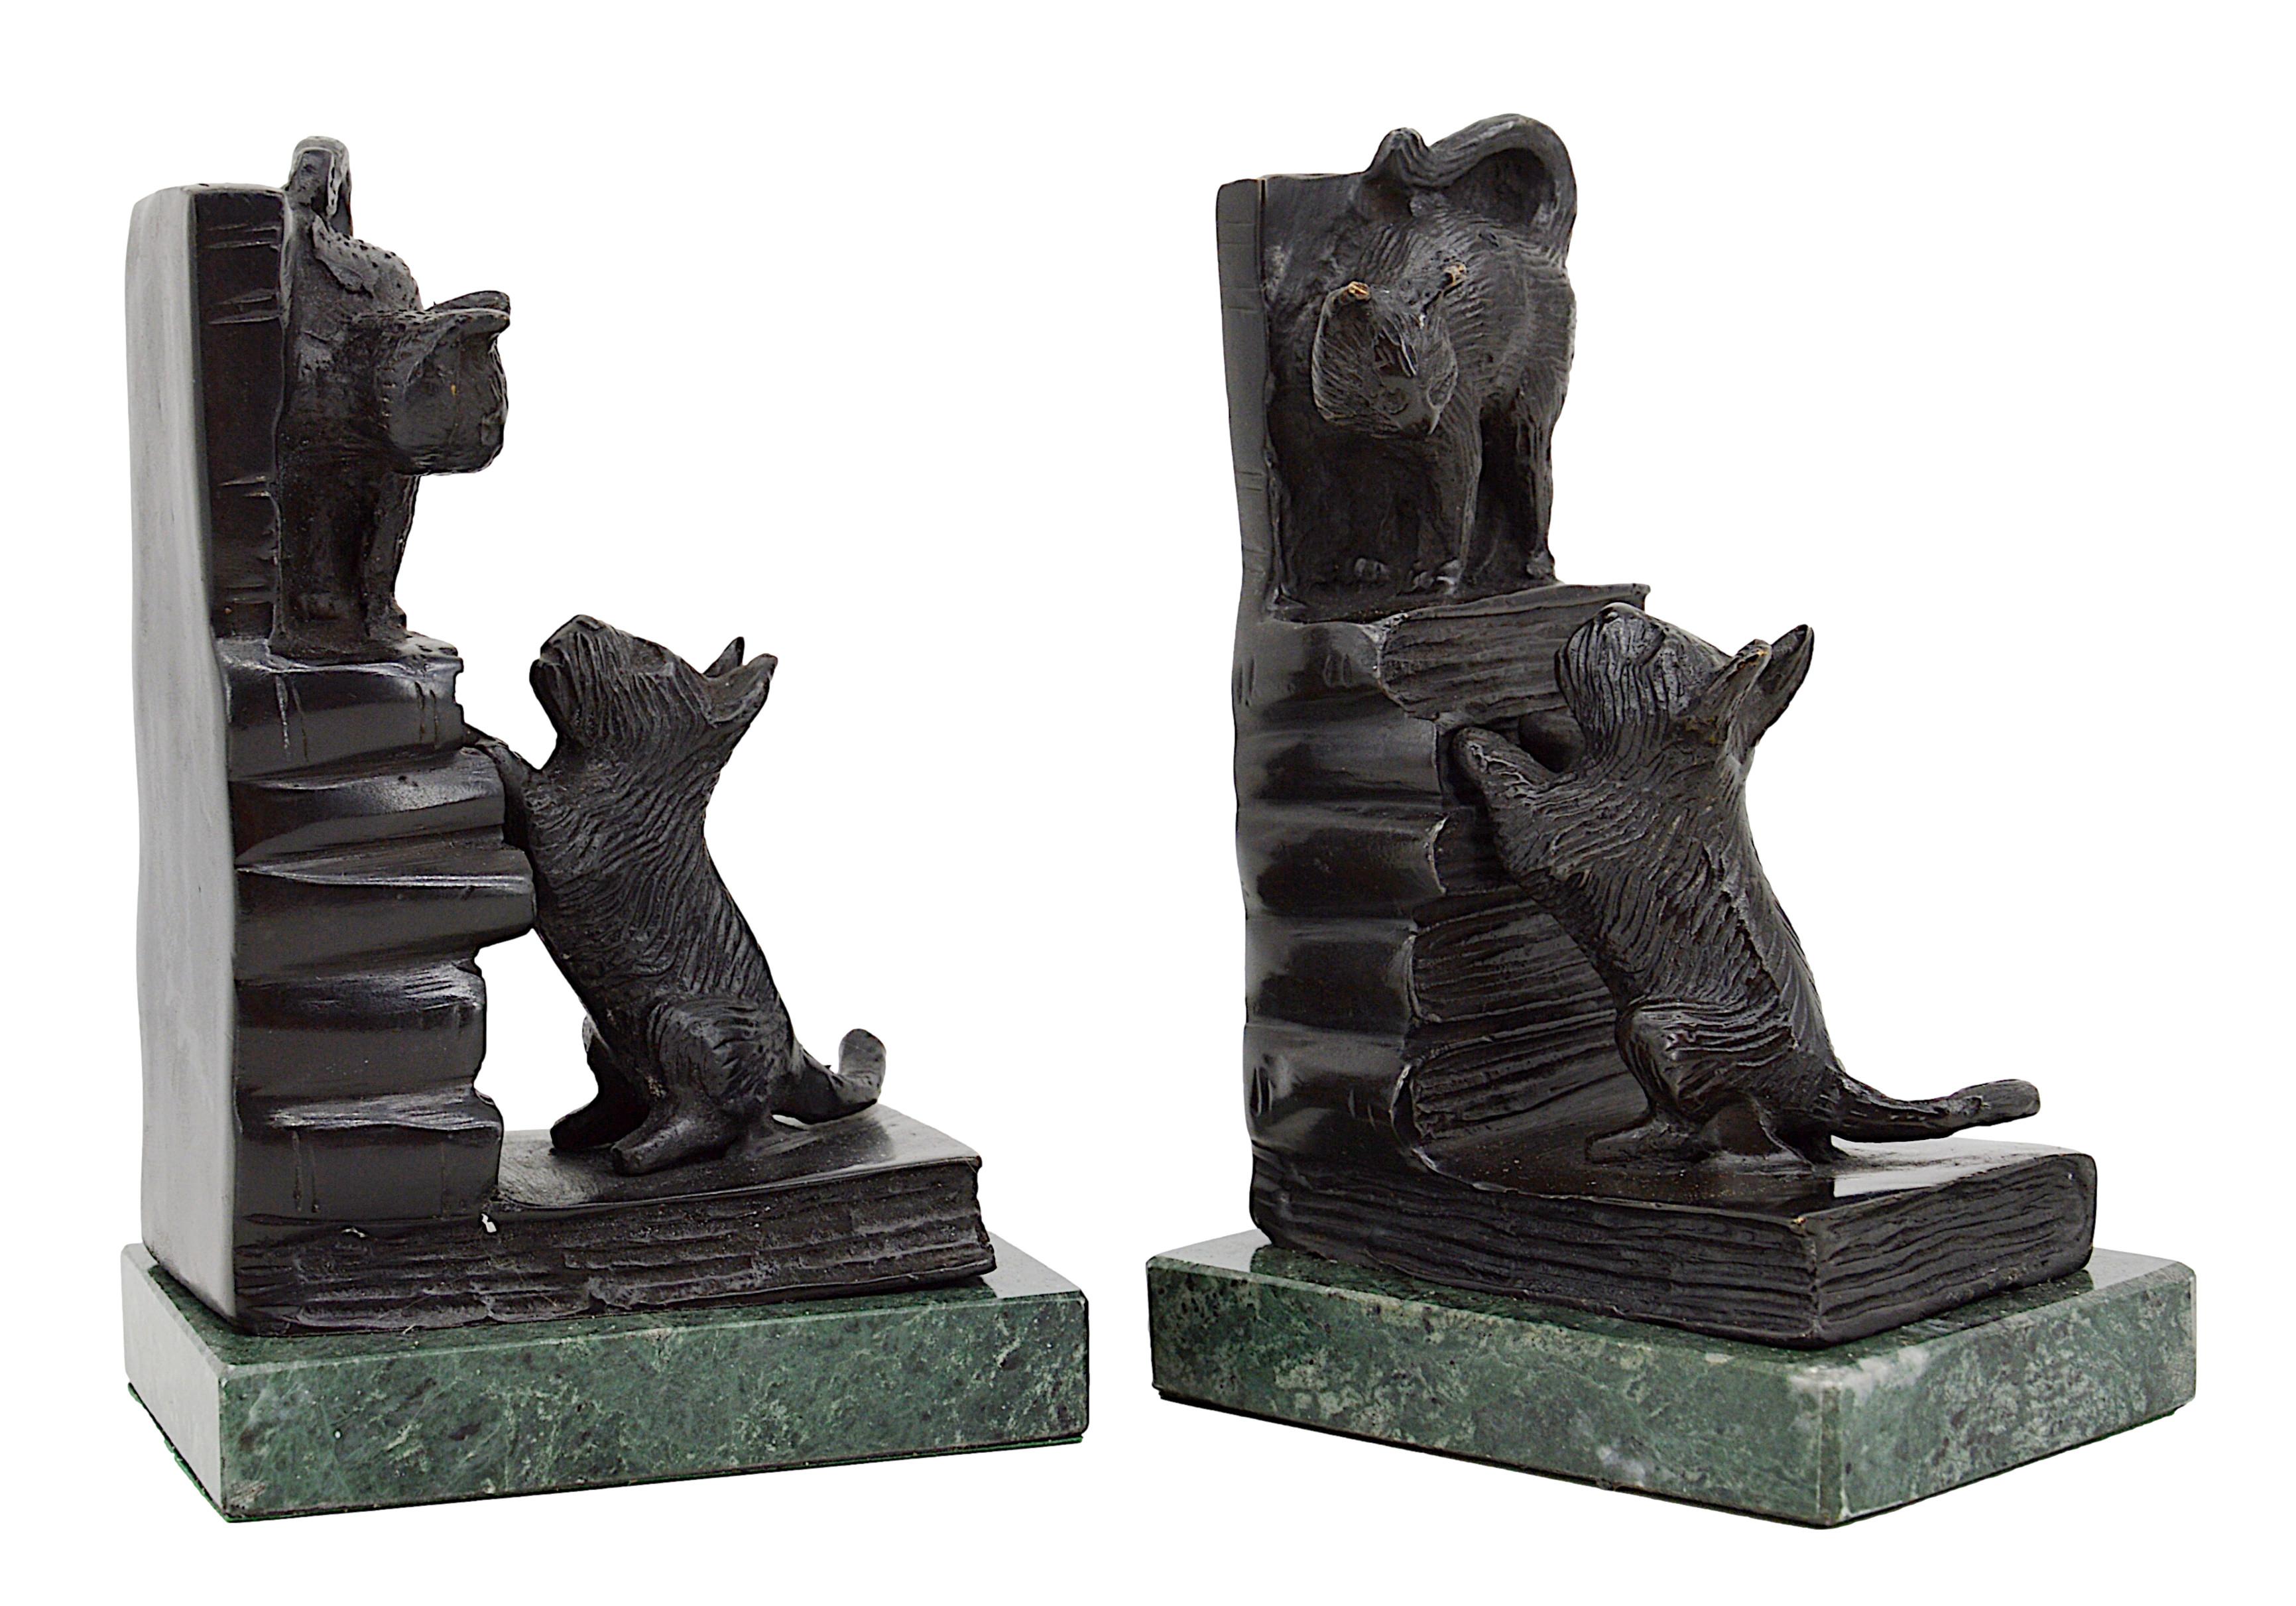 French Art Deco style bookends in bronze and marble. The dog tries to catch the cat who has taken refuge on a pile of books. Measures: Each bookend - Height: 5.9